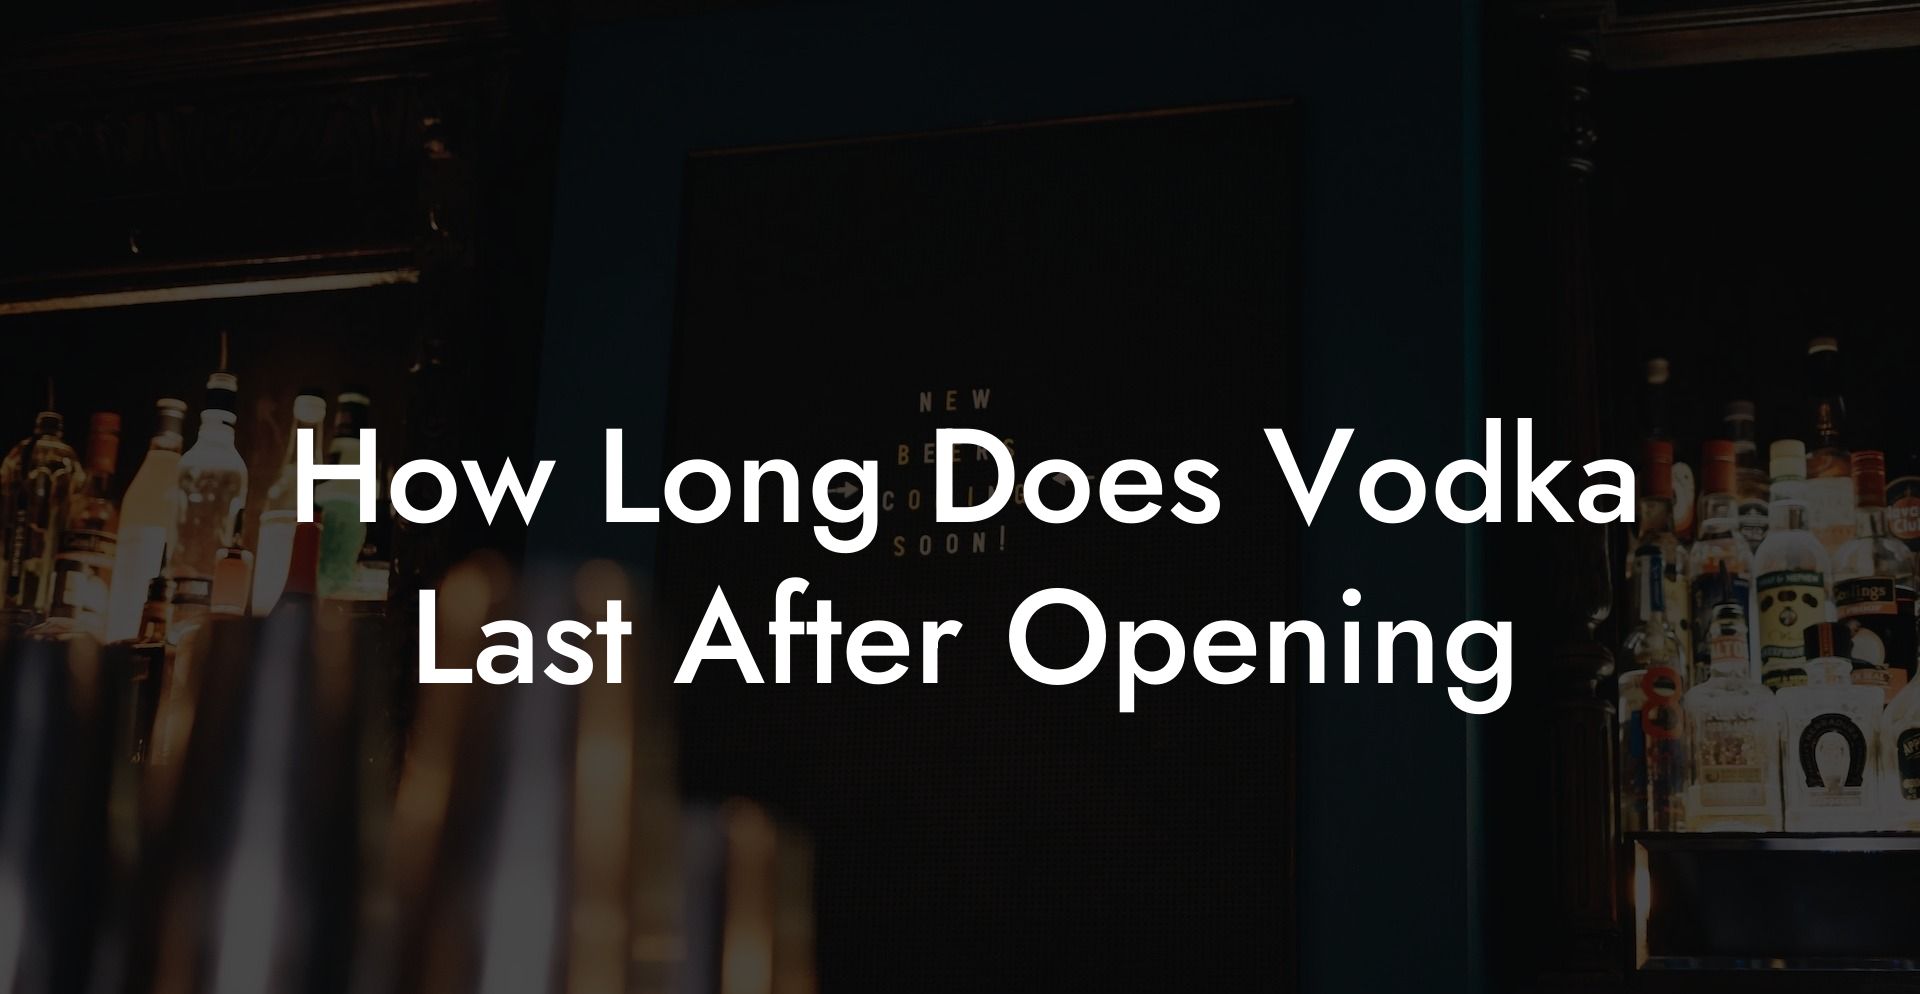 How Long Does Vodka Last After Opening